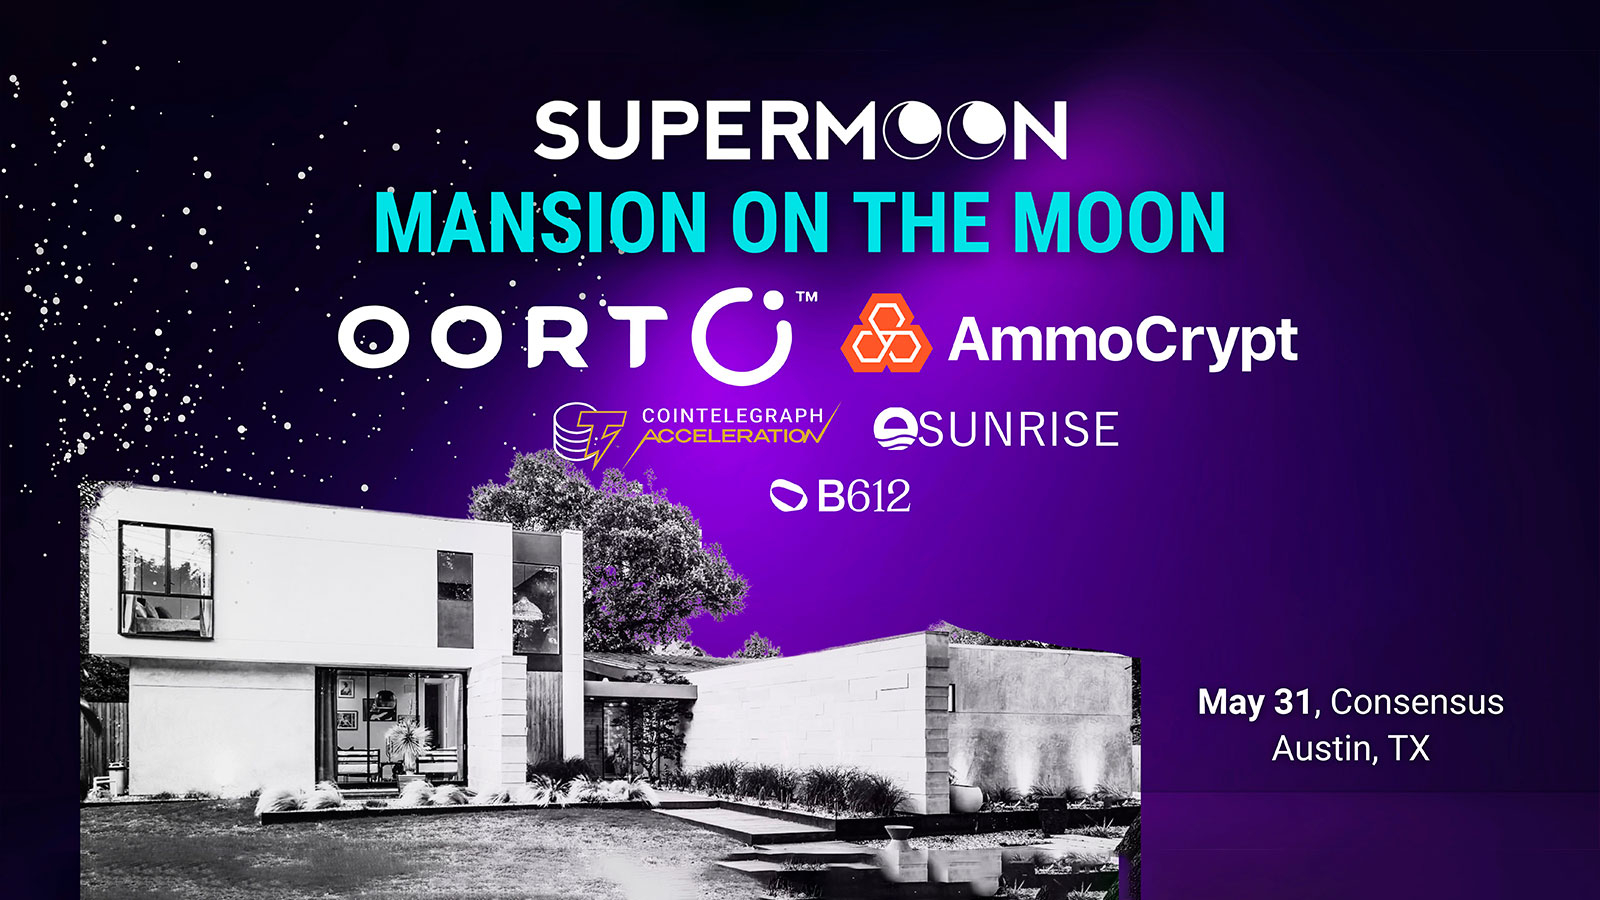 Supermoon, OORT, and Ammocrypt are Hosting 800+ Founders, Builders, Investors during Consensus